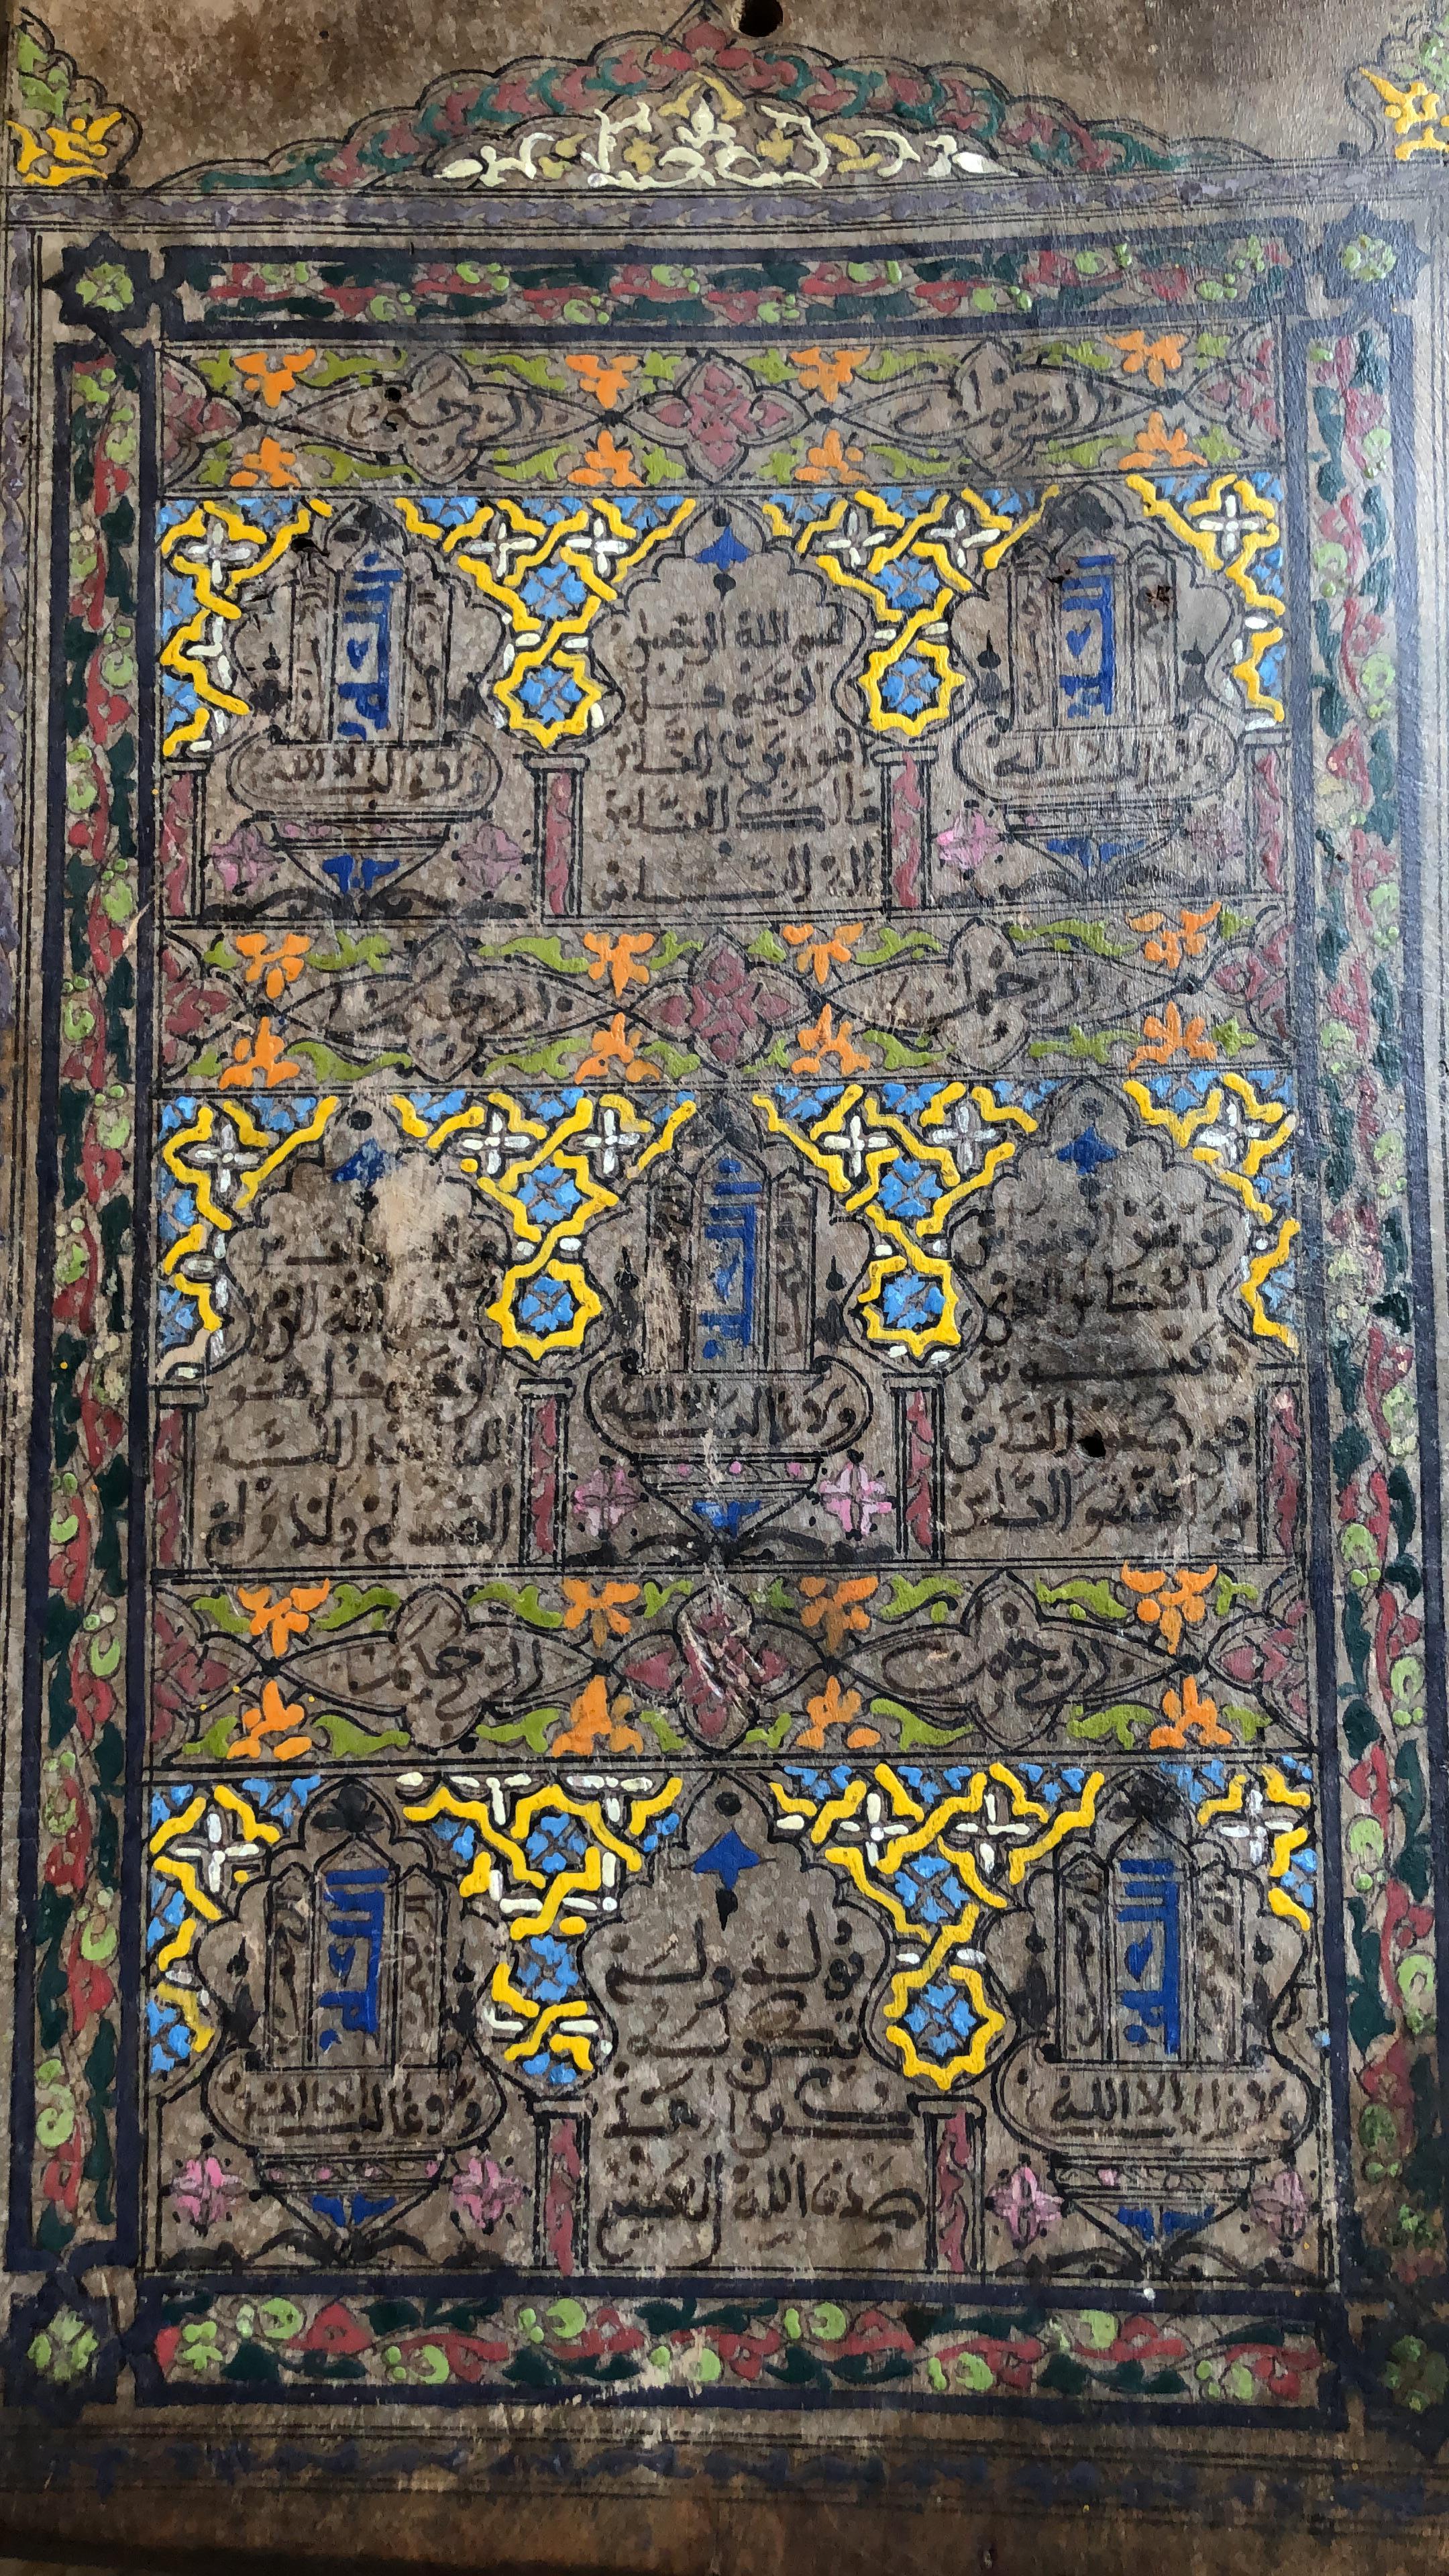 Vintage hand painted hardwood tablet inscribed with the opening verse from the Holy Quran, Bismillah hir-Rahman nir-Rahim. This tablet is circa early to mid-20th century and is from the southern Moroccan desert town of Zagora. Used in schools to